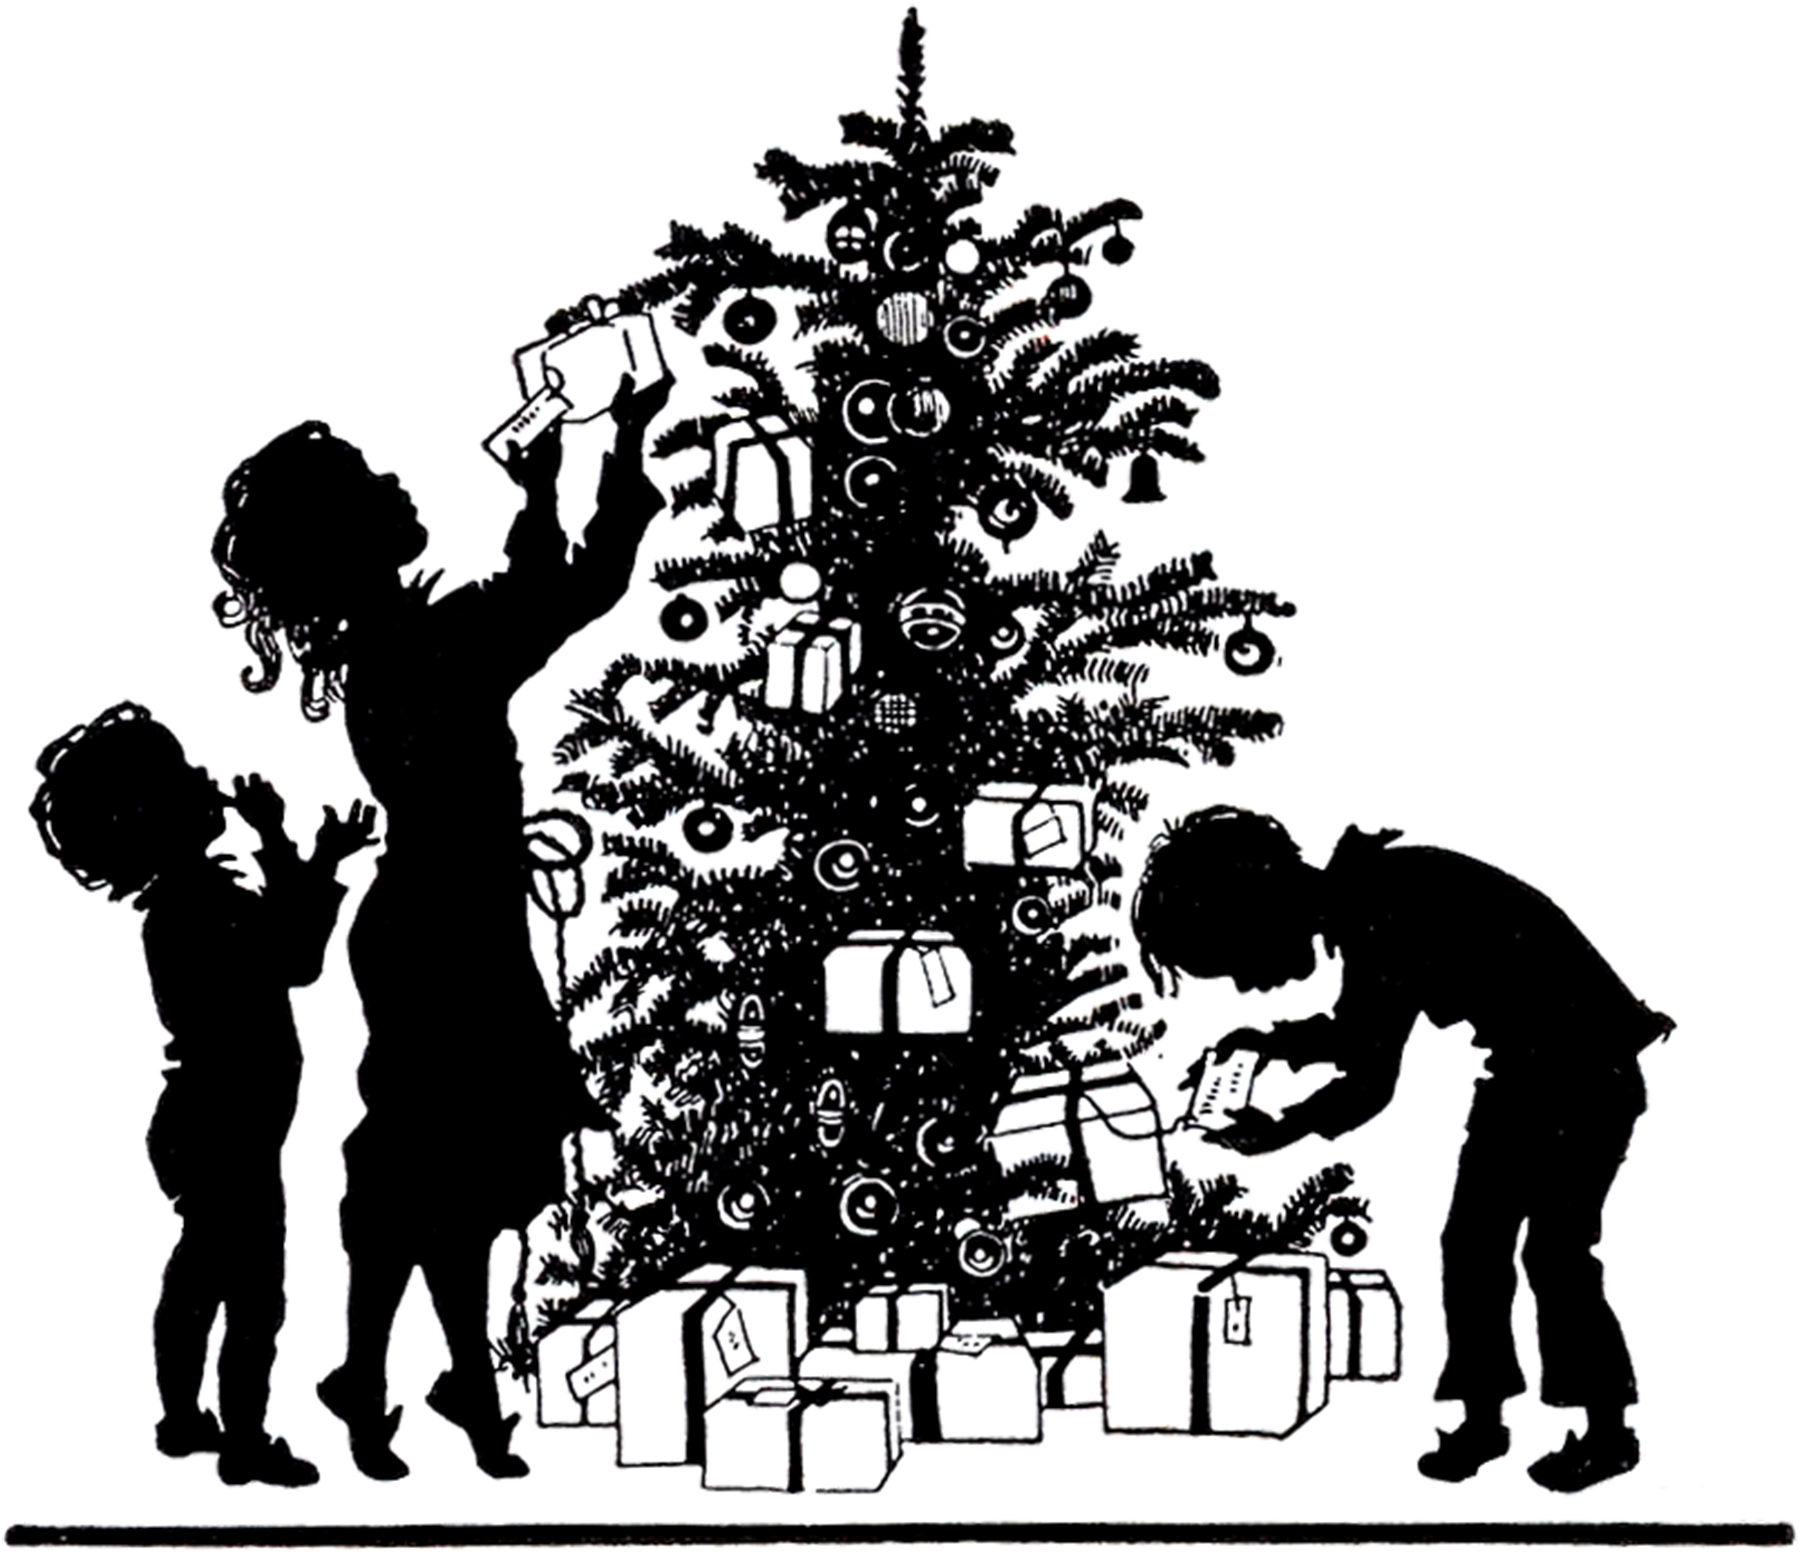 https://thegraphicsfairy.com/wp-content/uploads/2015/12/Christmas-morning-silhouette-GraphicsFairy.jpg